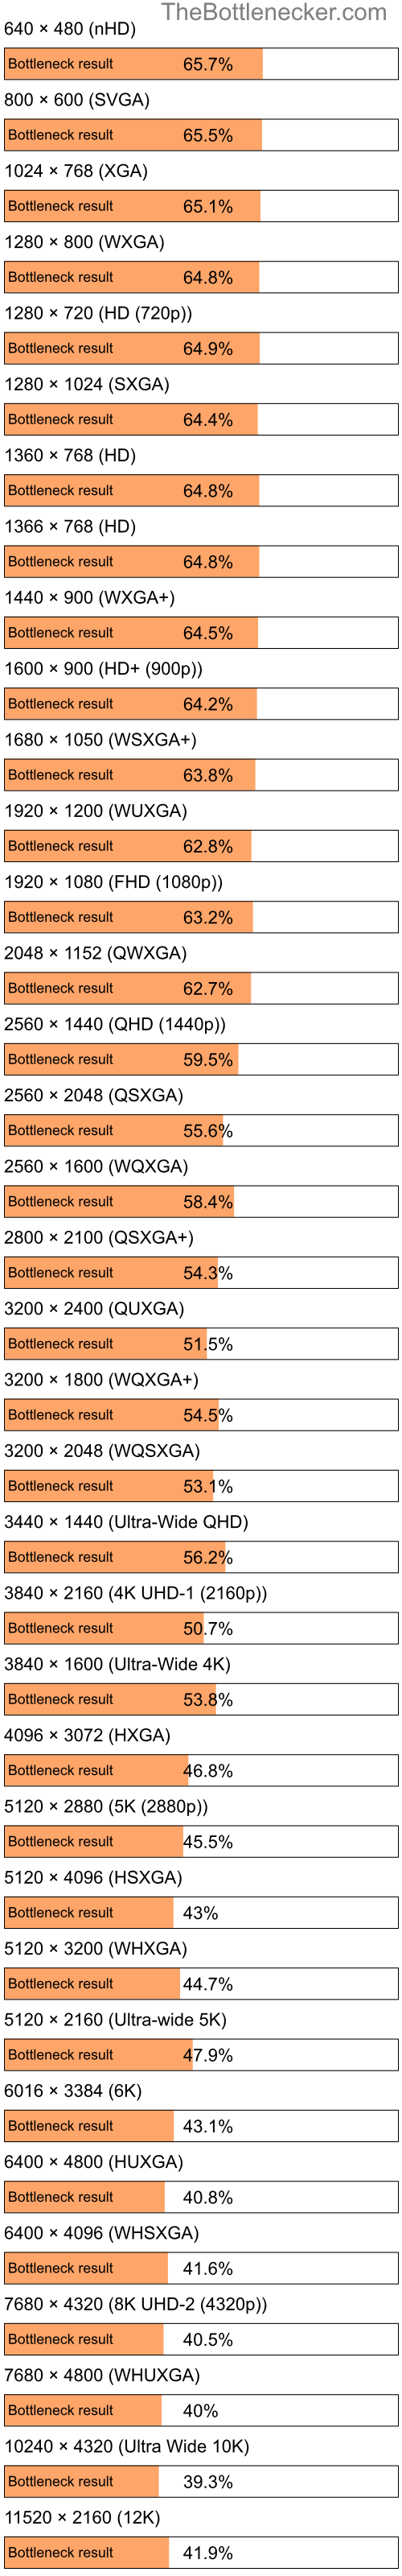 Bottleneck results by resolution for Intel Core i5-3470 and NVIDIA GeForce RTX 3090 in General Tasks